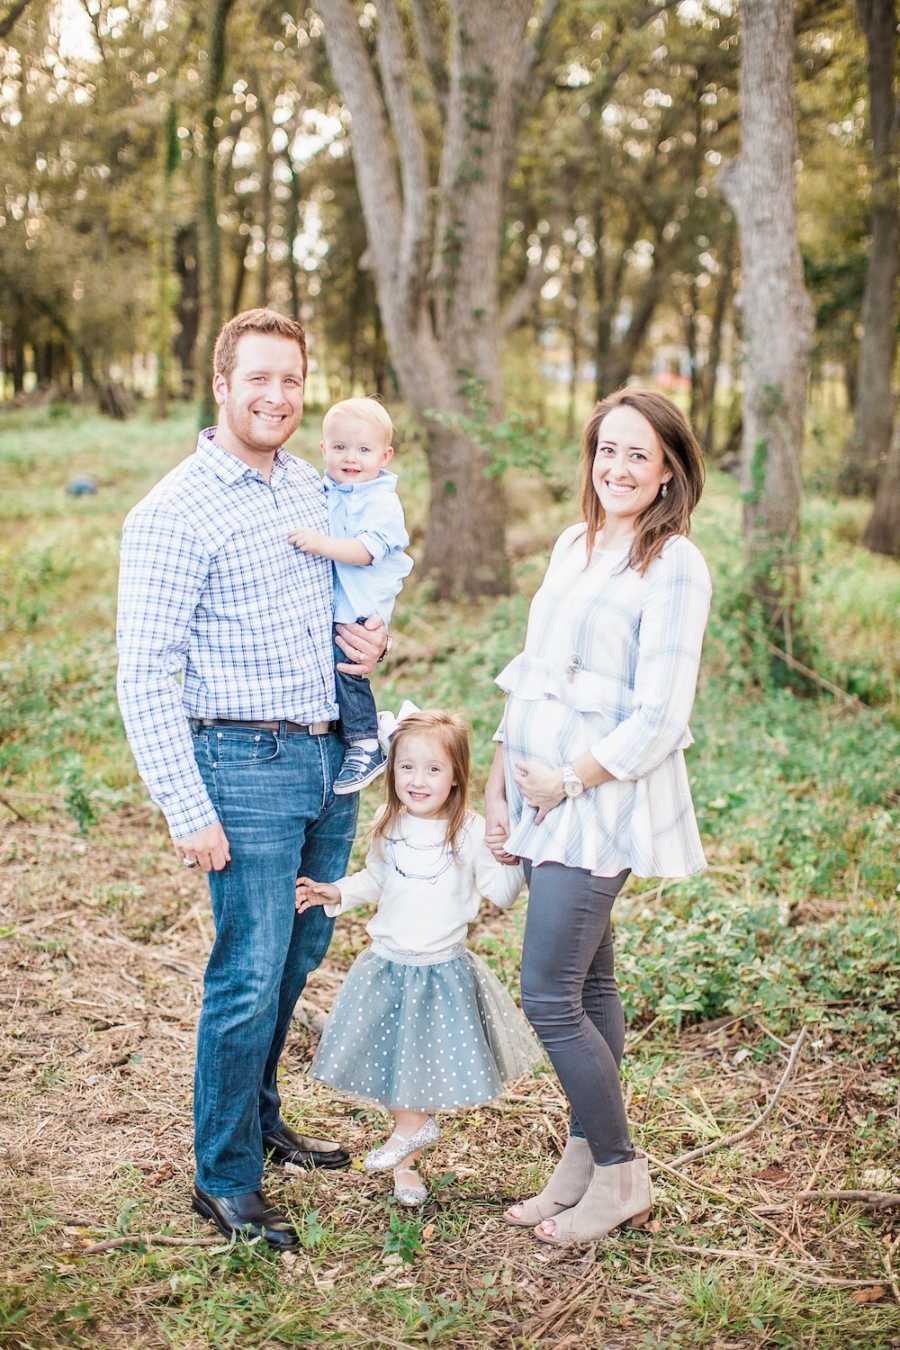 Pregnant woman stands outside smiling in wooded area with daughter and husband who holds son